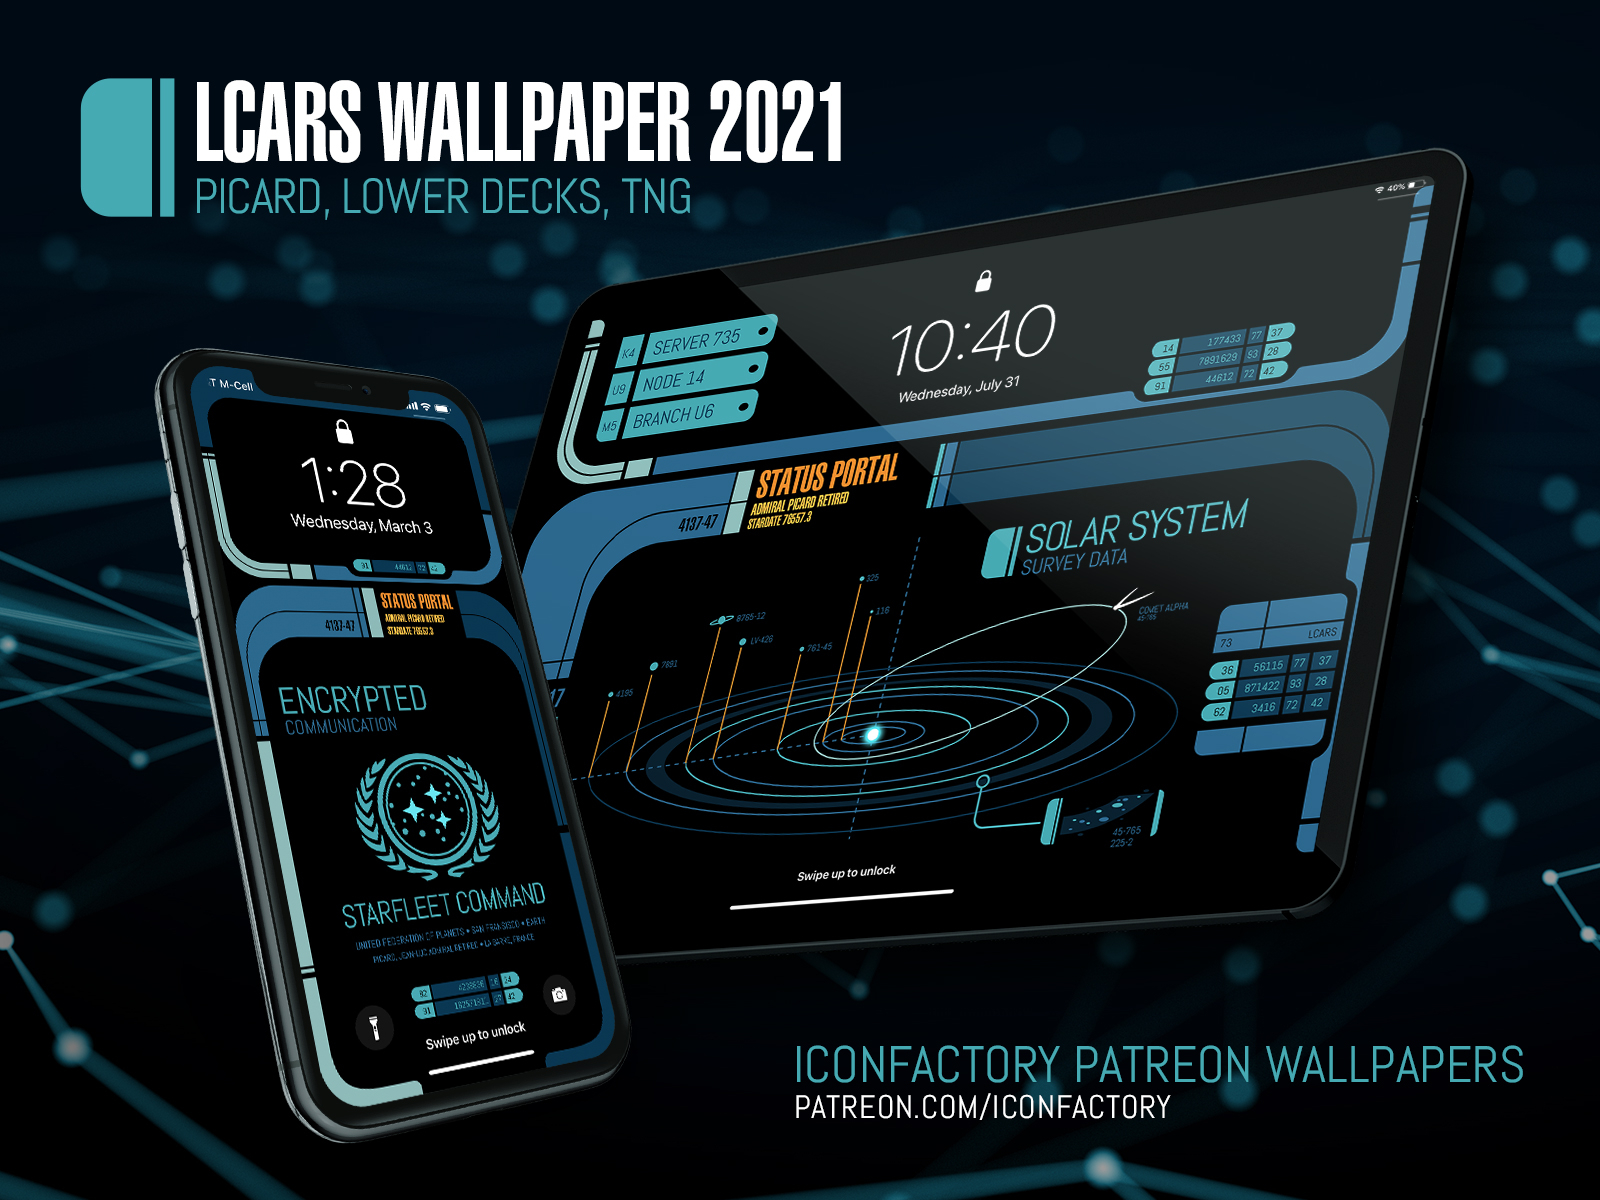 Star Trek LCARS 2021 Wallpapers by Iconfactory on Dribbble